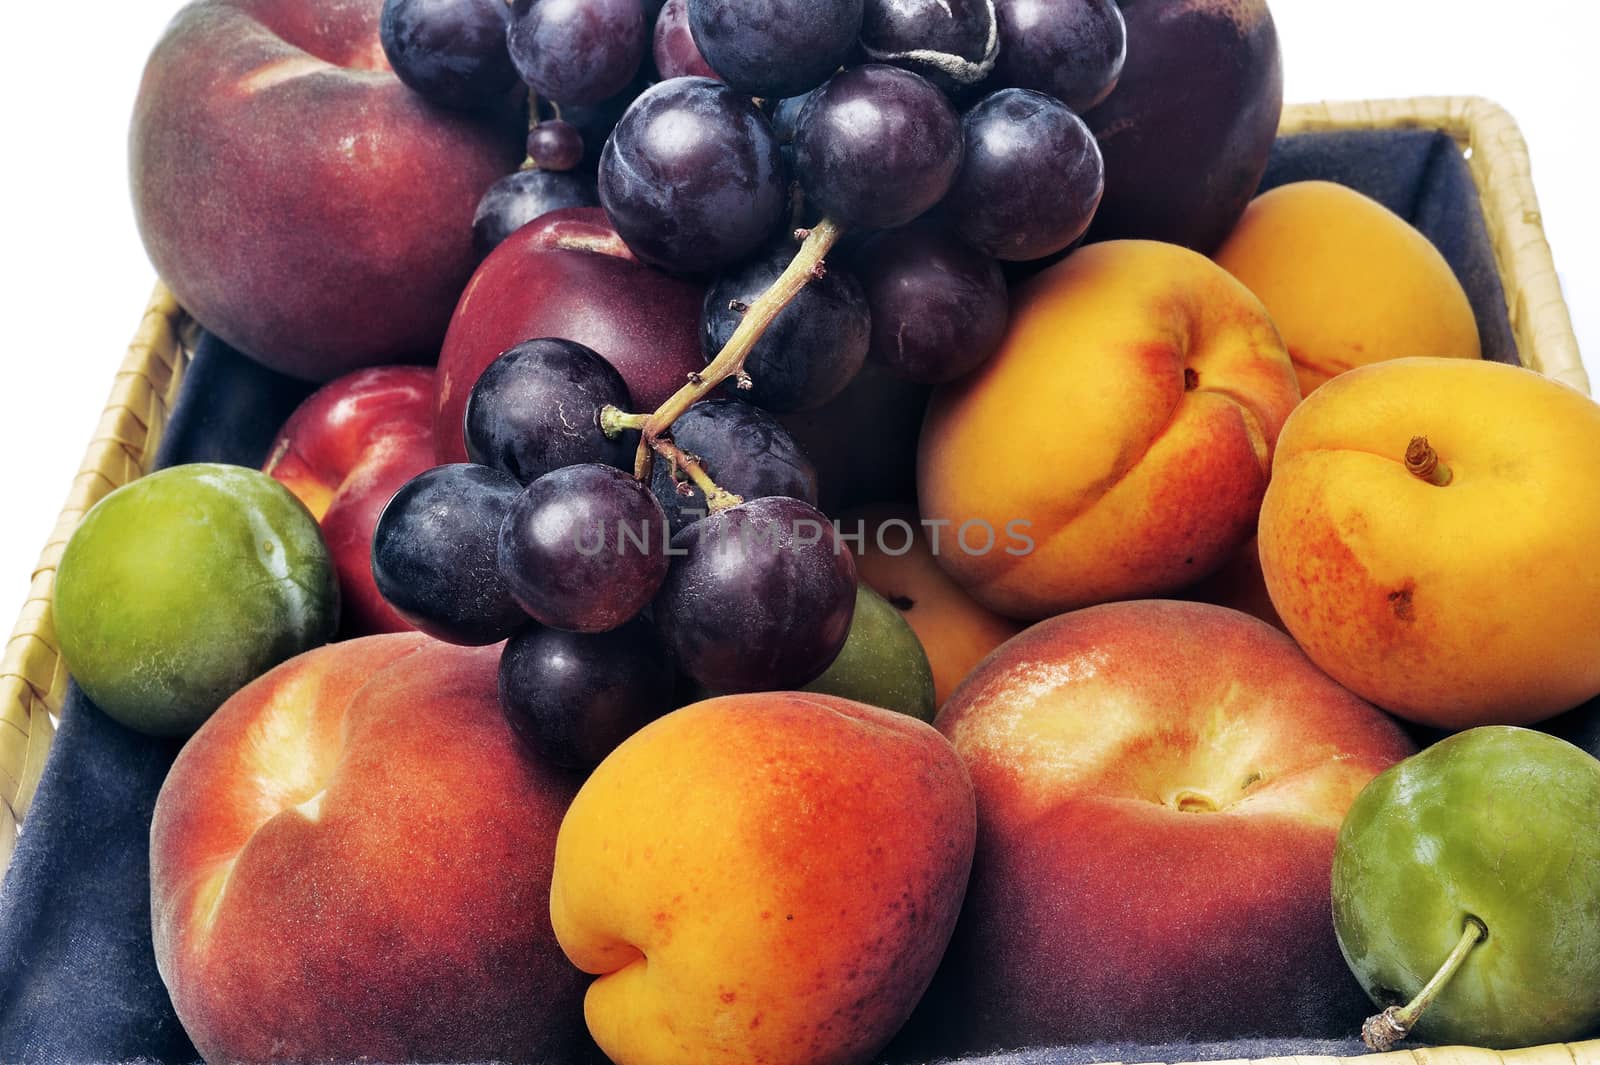 Basket of fruit isolated on white background in studio by gillespaire